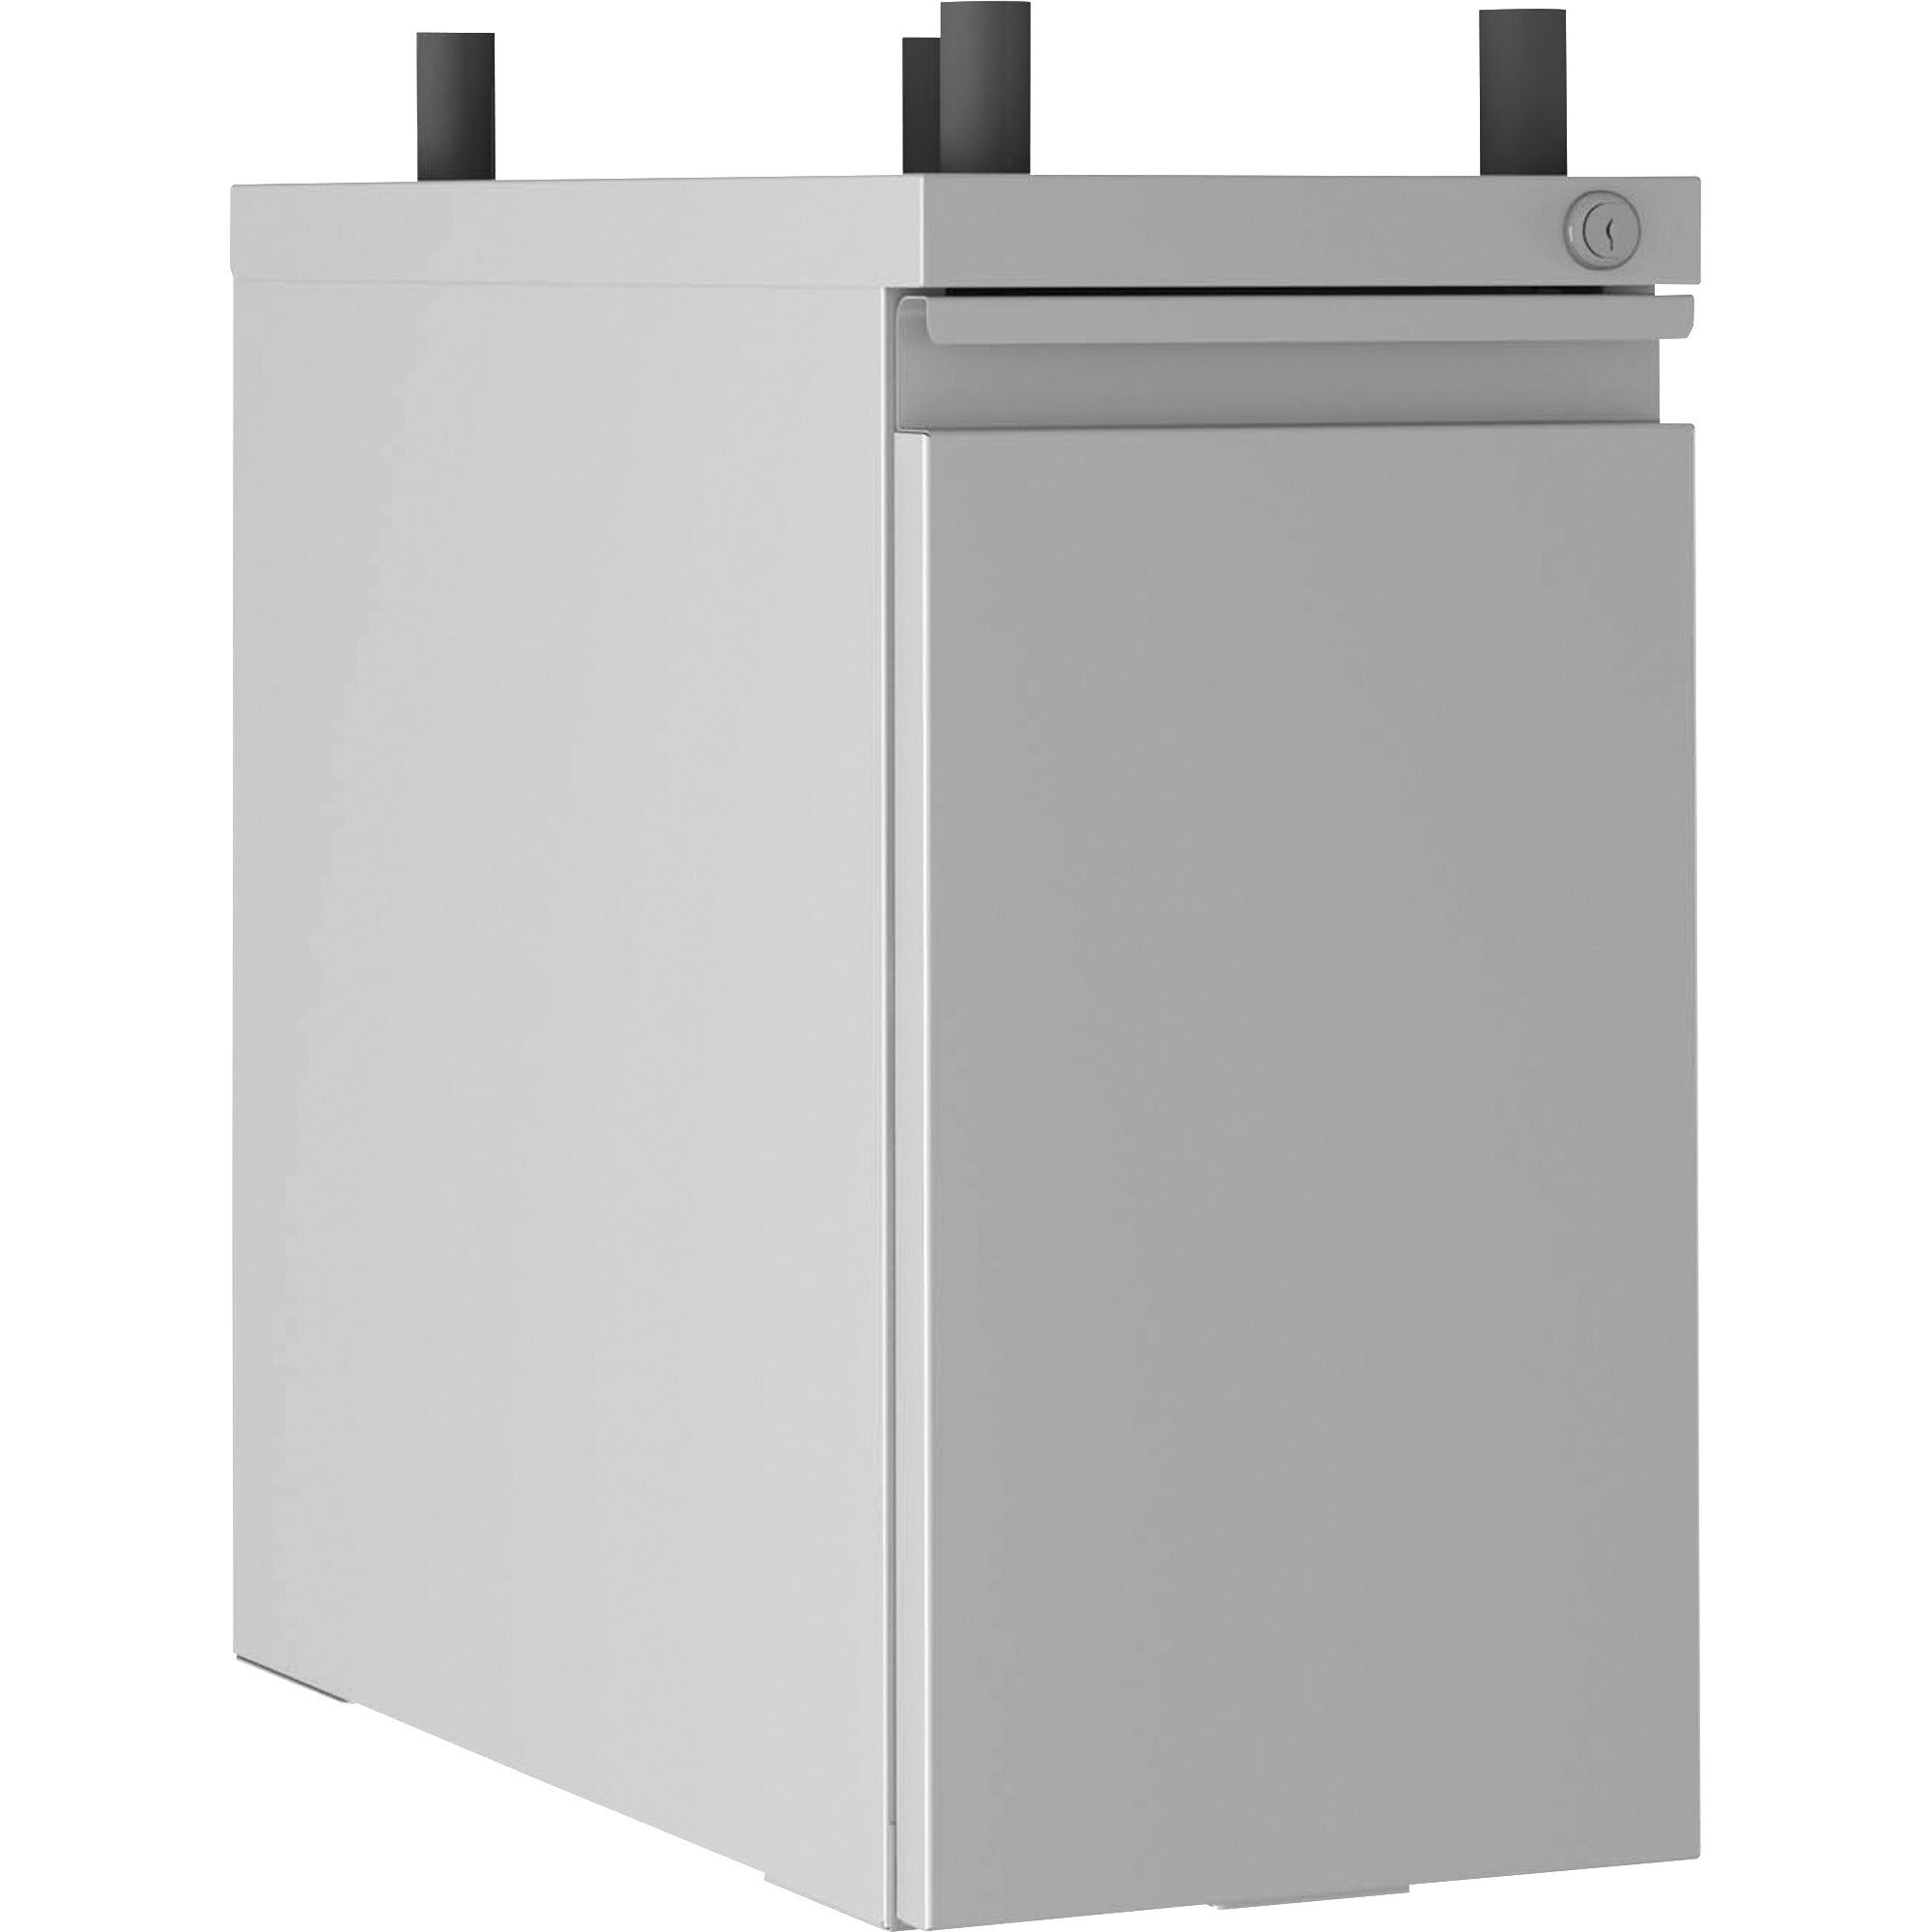 lorell-slim-hanging-tower-file-cabinet-with-concealed-drawer-10-x-20-x-192-letter-legal-vertical-casters-compact-storage-space-hanging-rail-key-lock-silver-powder-coated-metal-recycled_llr00046 - 1